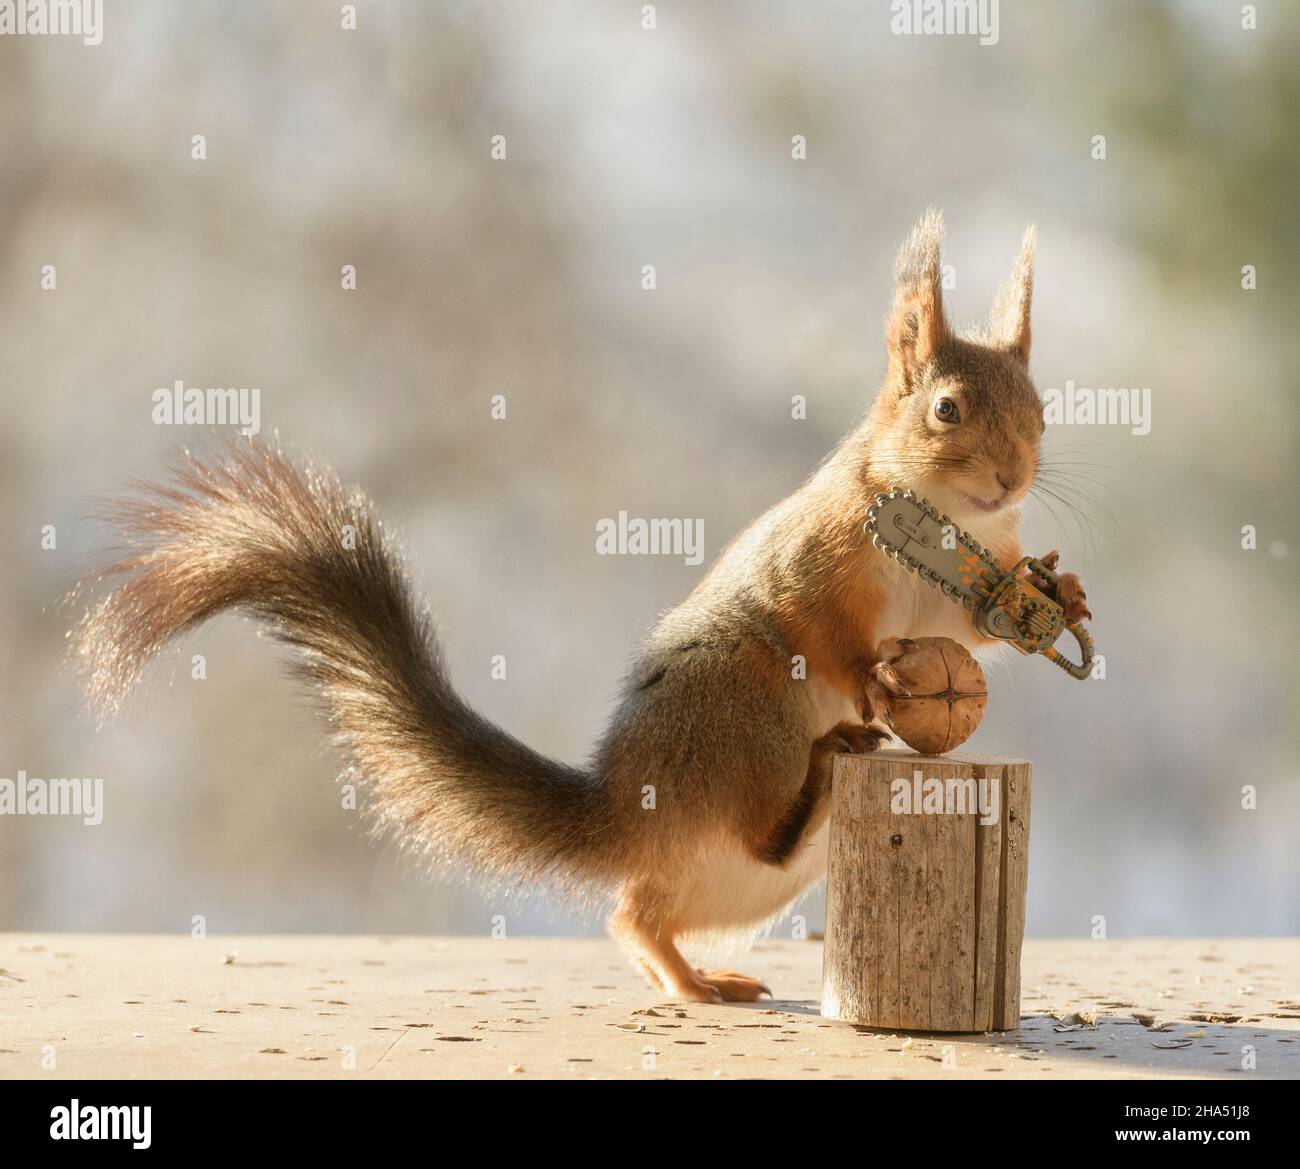 red squirrel is holding an chain saw with walnut Stock Photo